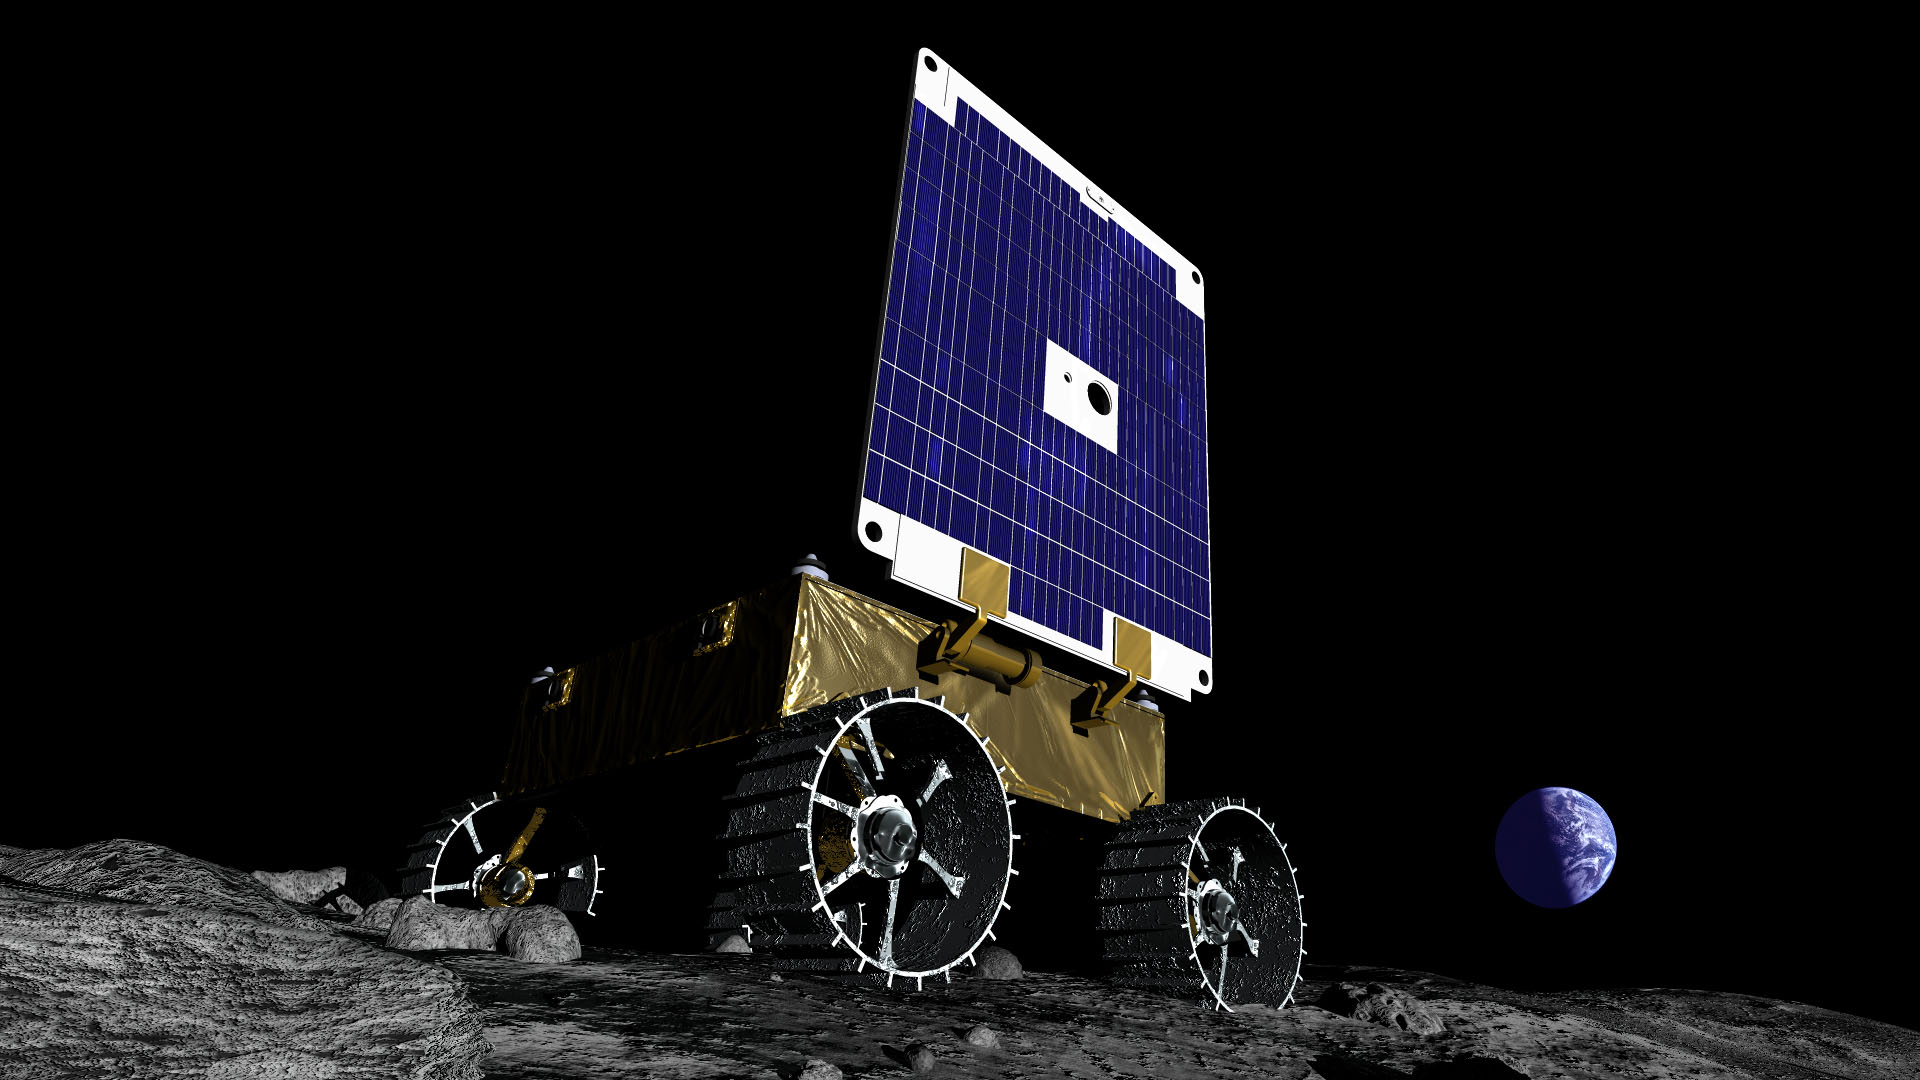 Graphic illustrations shows the suitcase-sized rover on the surface of the moon and Earth is seen in the distant background of the image.